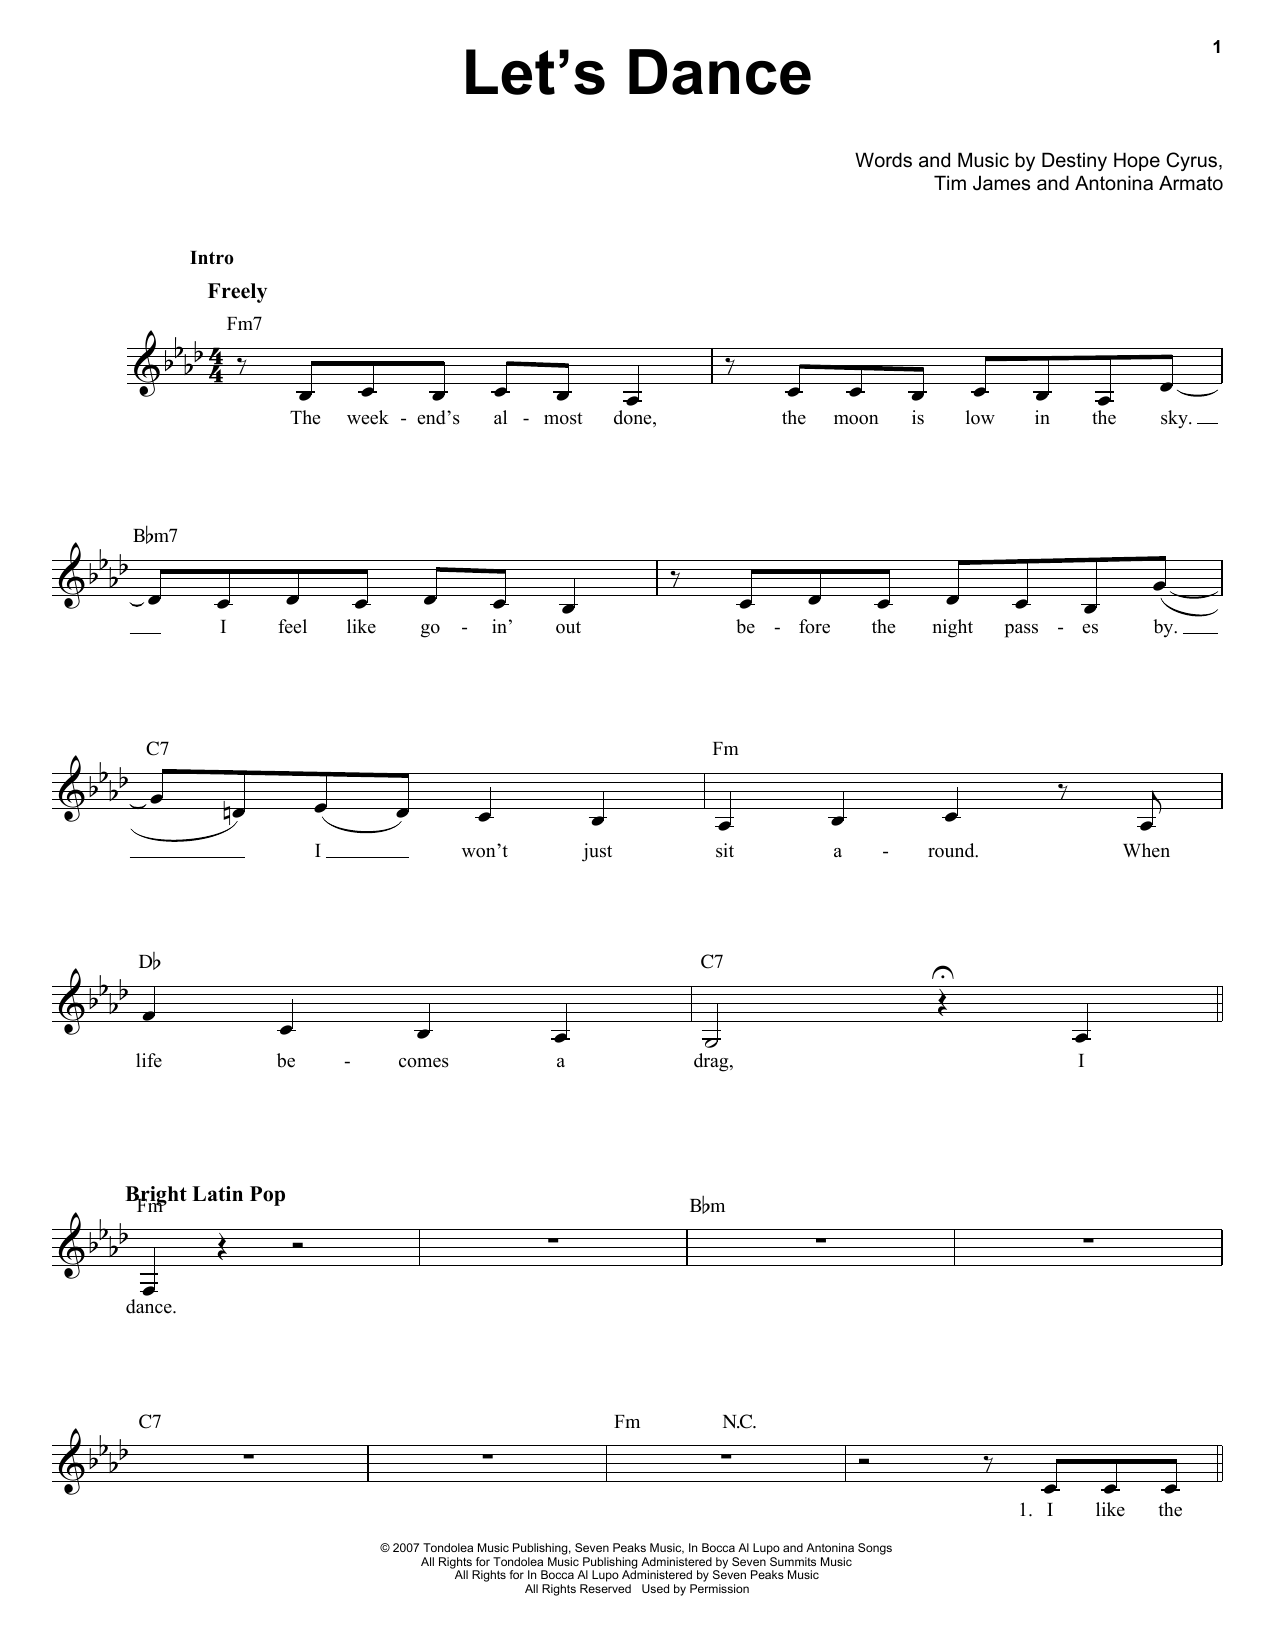 Download Miley Cyrus Let's Dance Sheet Music